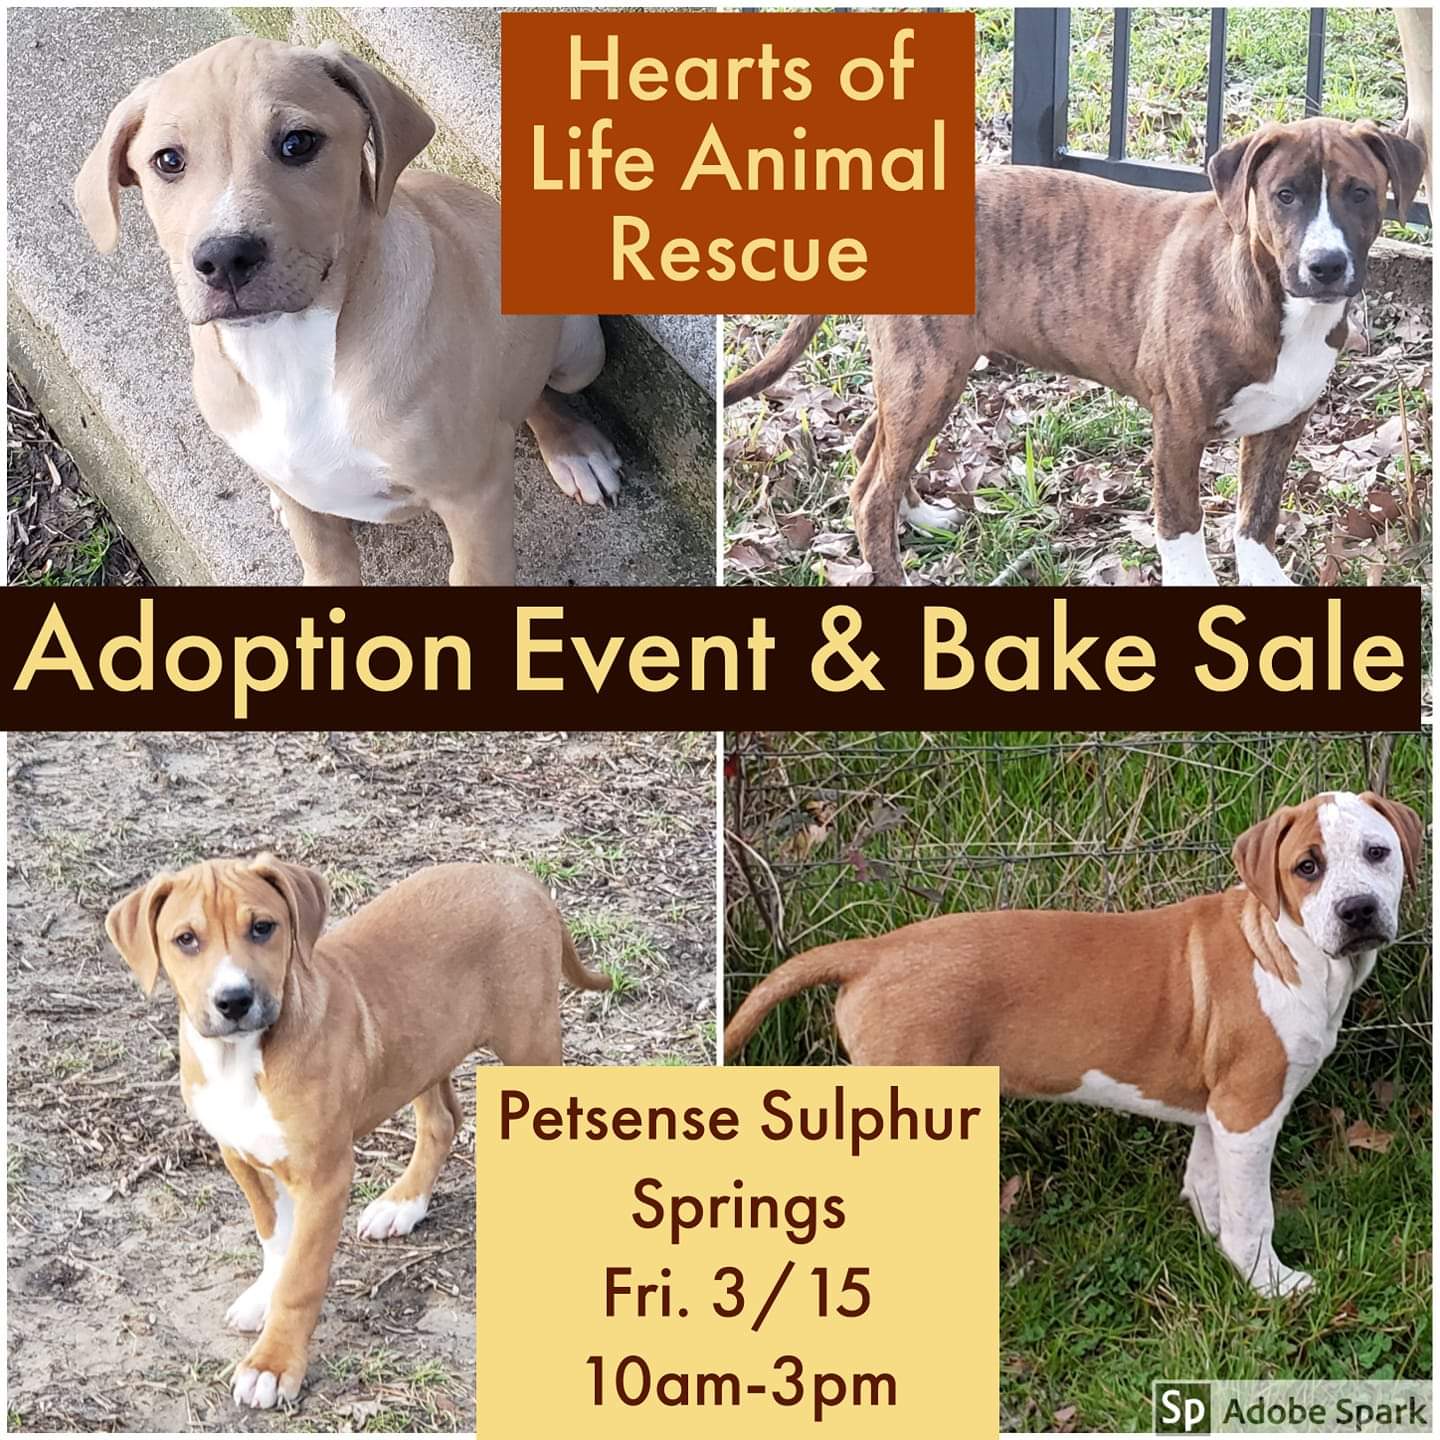 Hearts of Life Animal Rescue Holding Adoption Event Today in Sulphur Springs